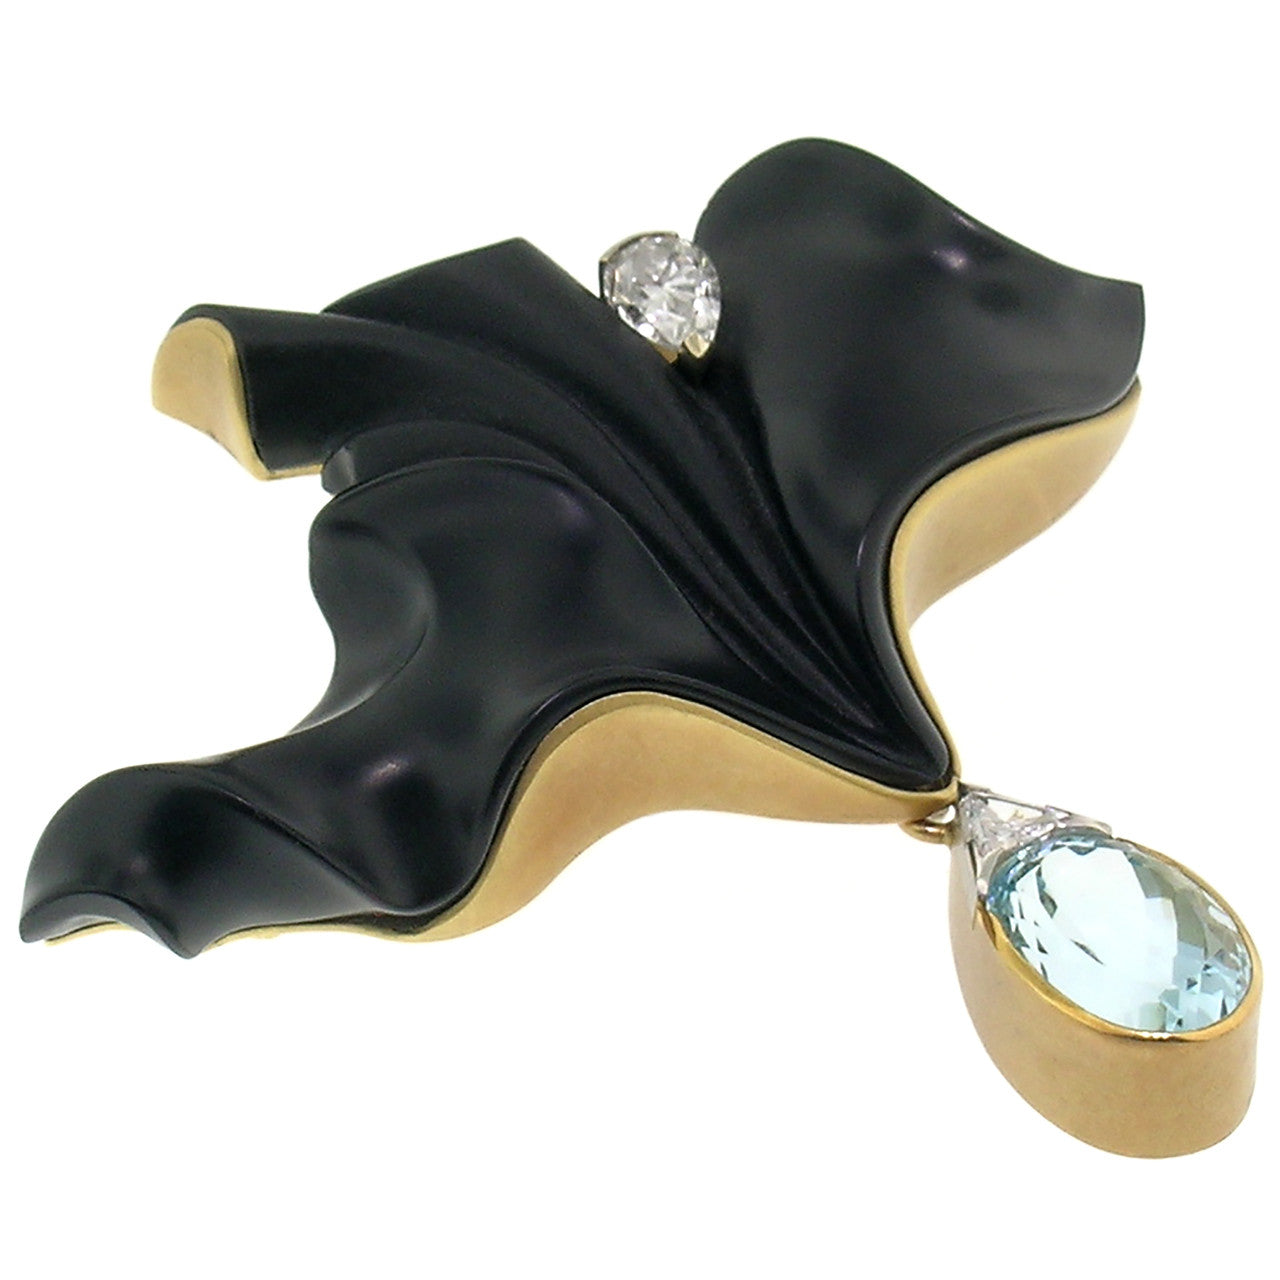 Steve Walters Carved Chalcedony and Aquamarine 18kt Pendant & Brooch made in USA by ART Guyon for Cynthia Scott Jewelry